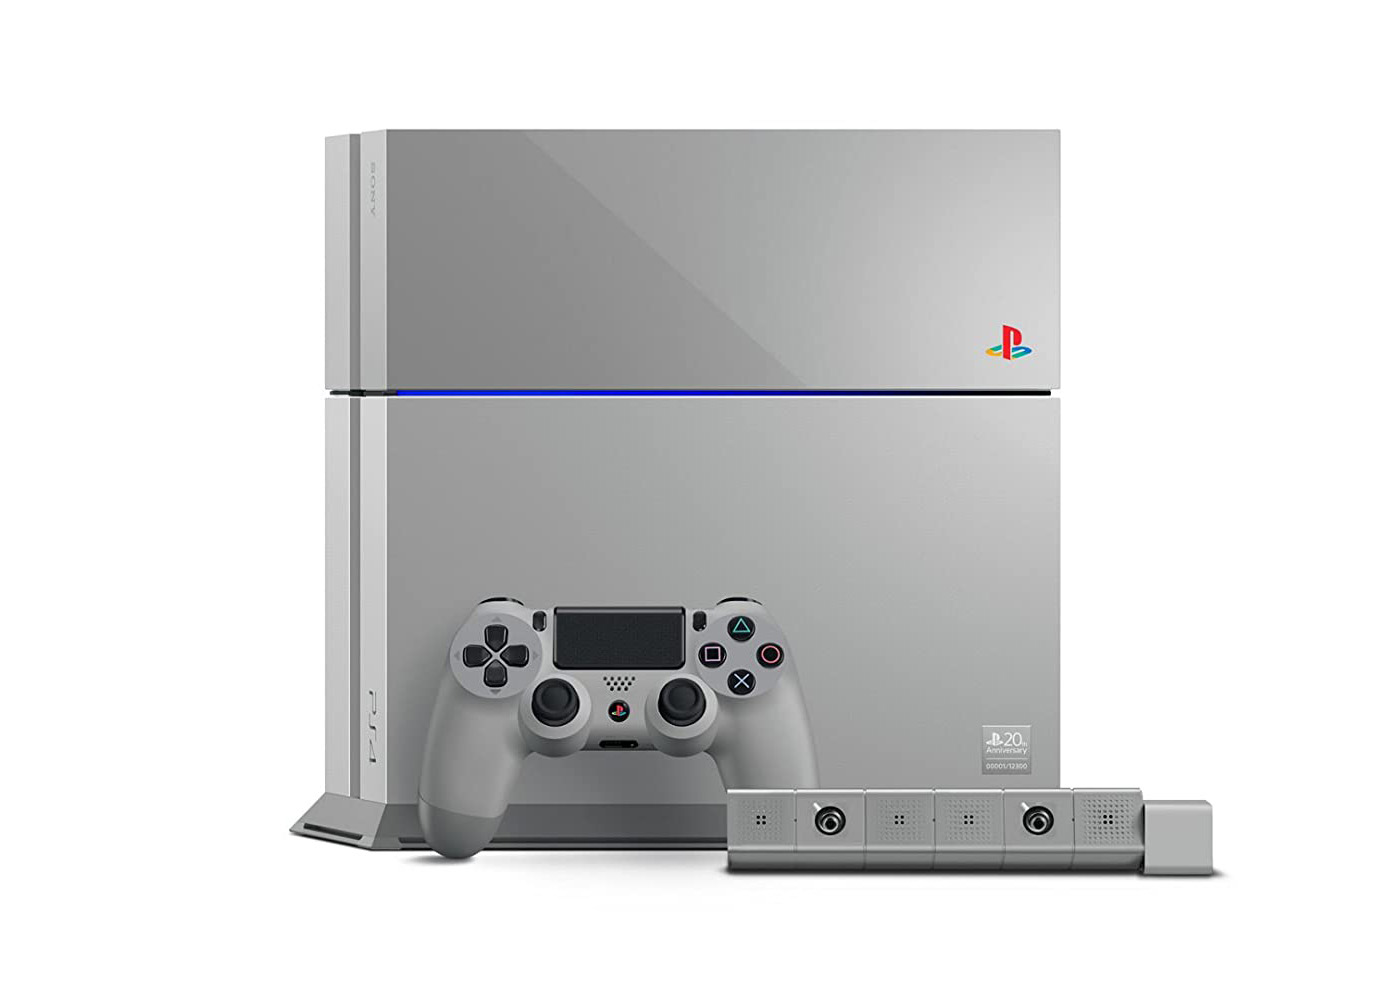 ps4 white edition